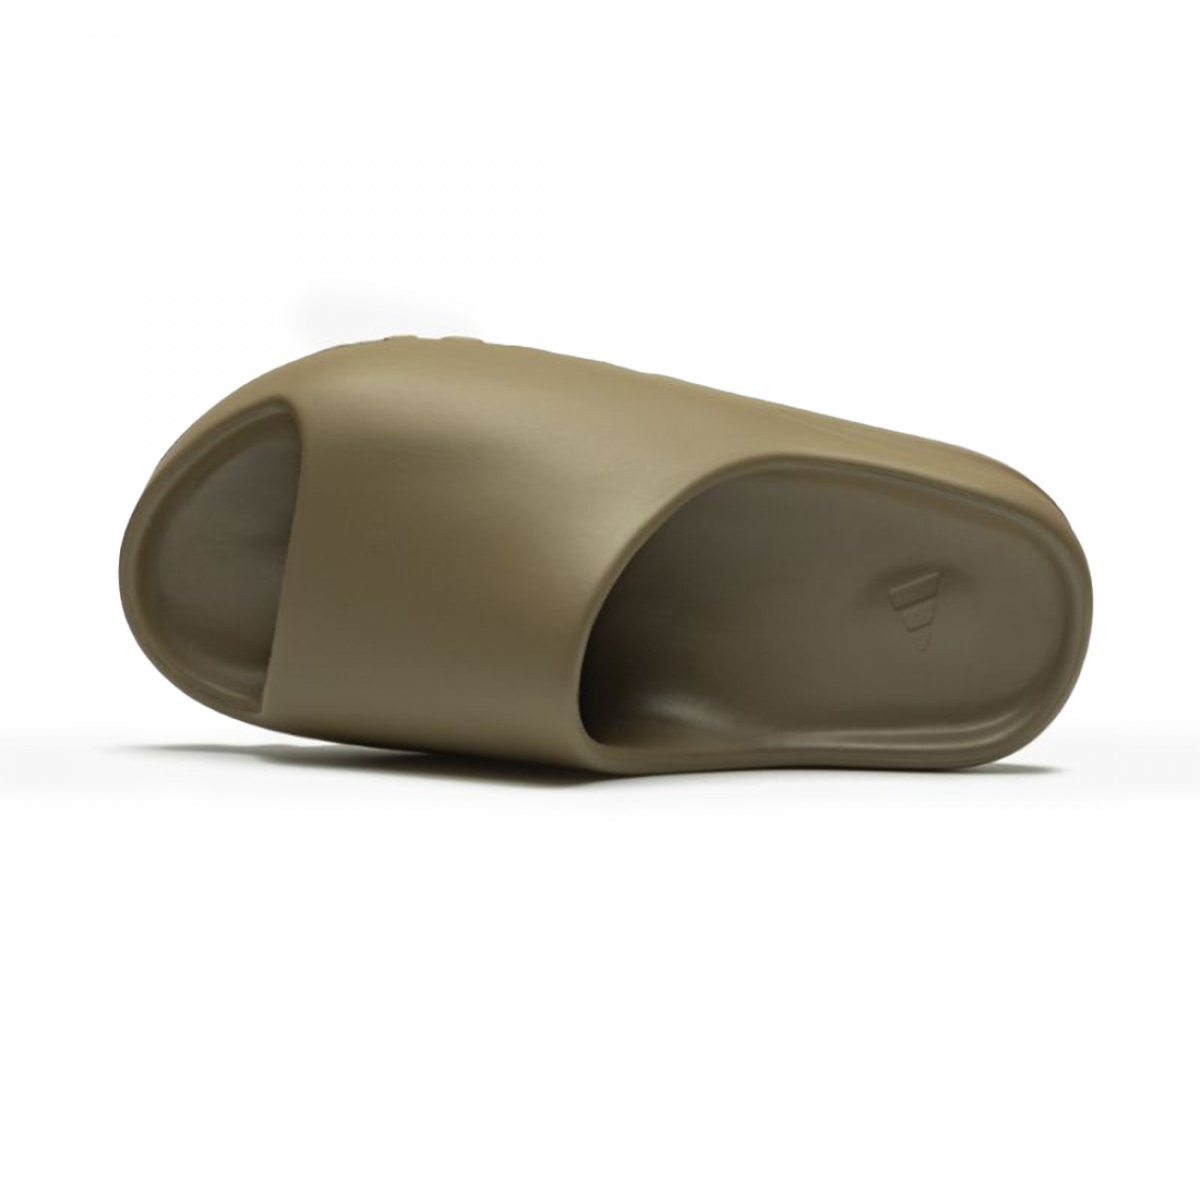 Yeezy Slide “Earth Brown” – PK-Shoes